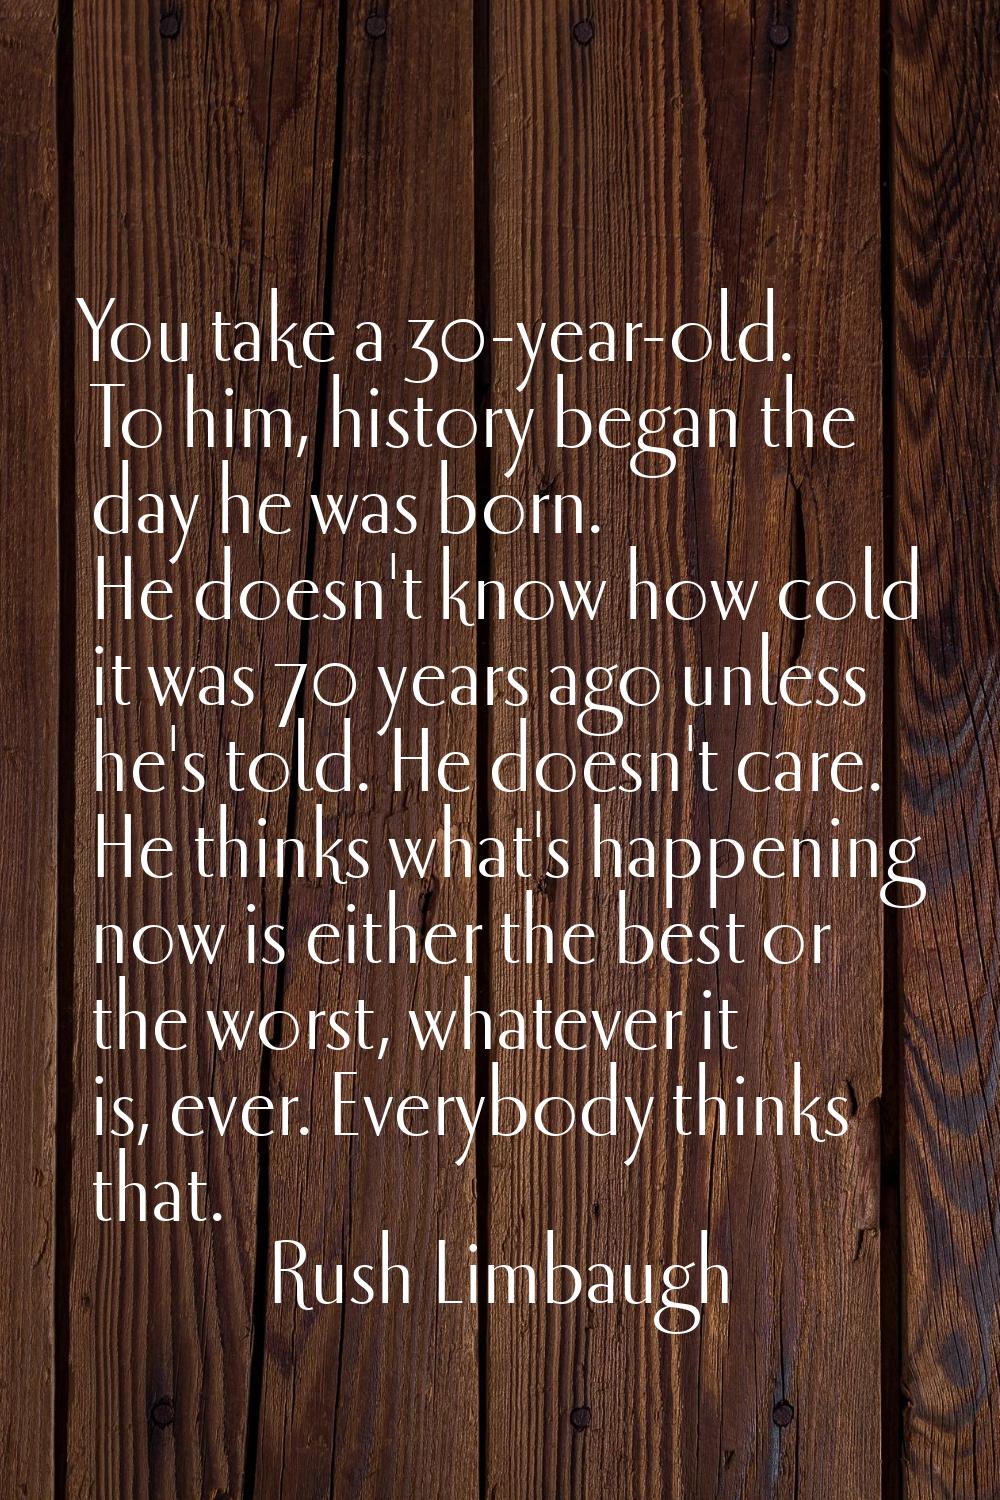 You take a 30-year-old. To him, history began the day he was born. He doesn't know how cold it was 